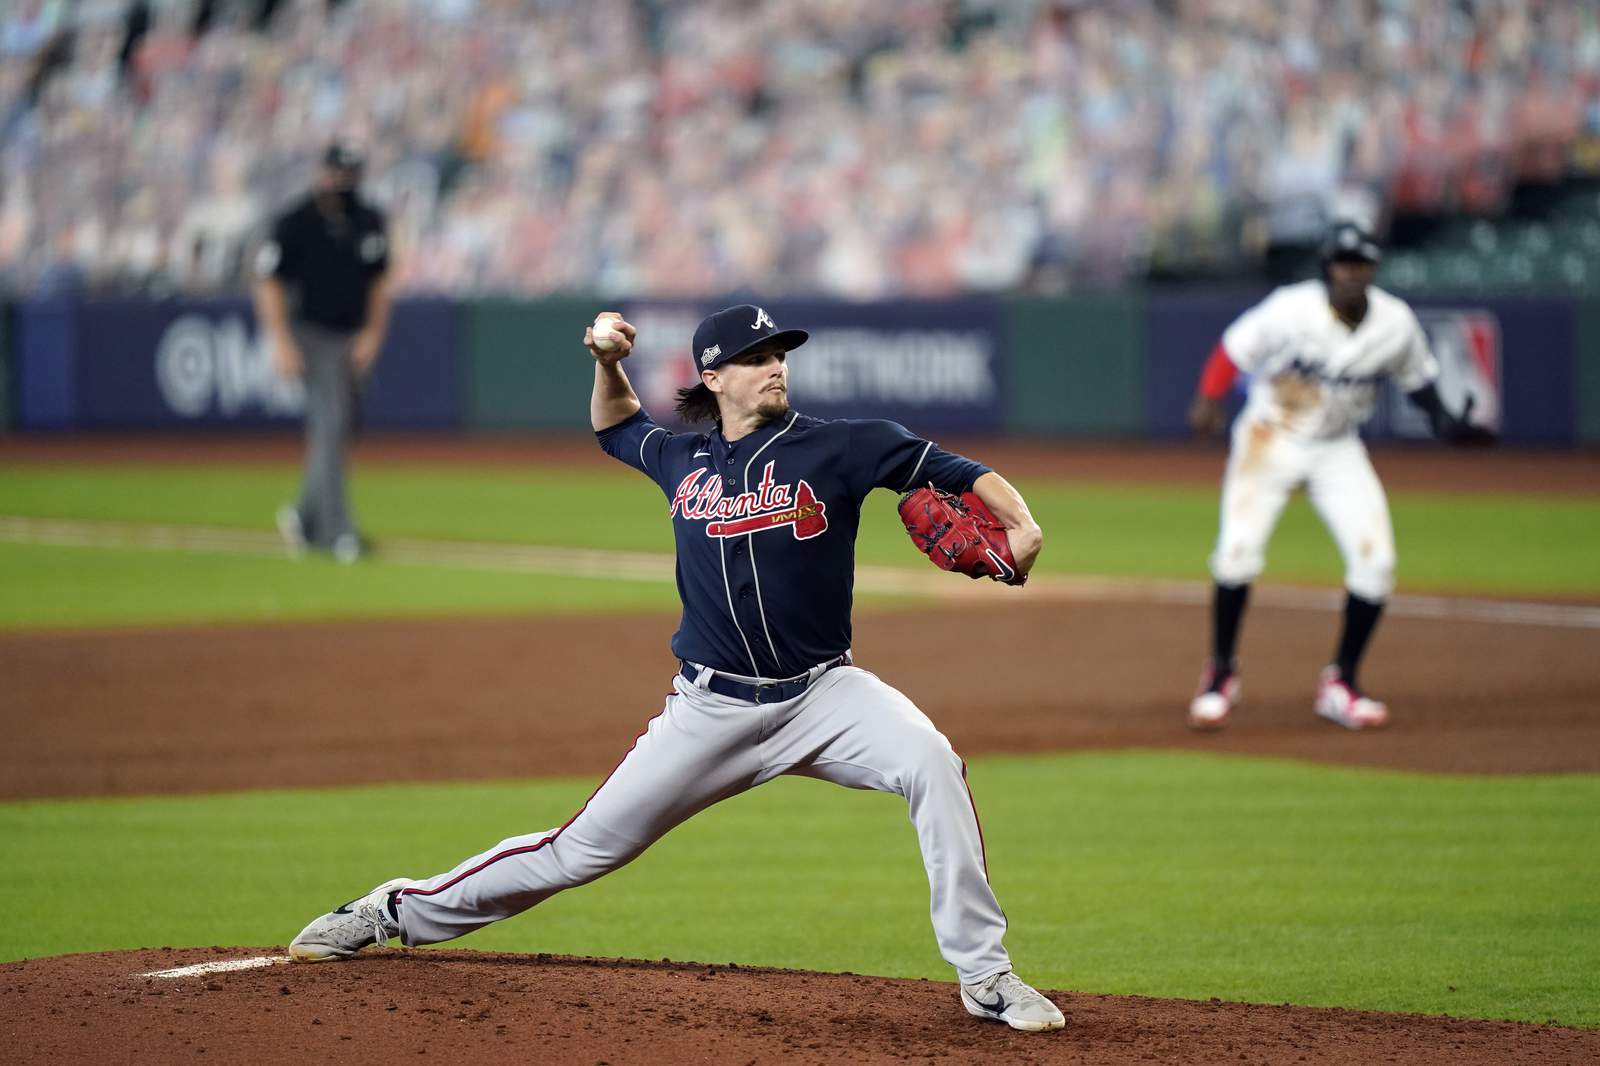 Wright, d'Arnaud lead Braves to sweep Marlins, reach NLCS